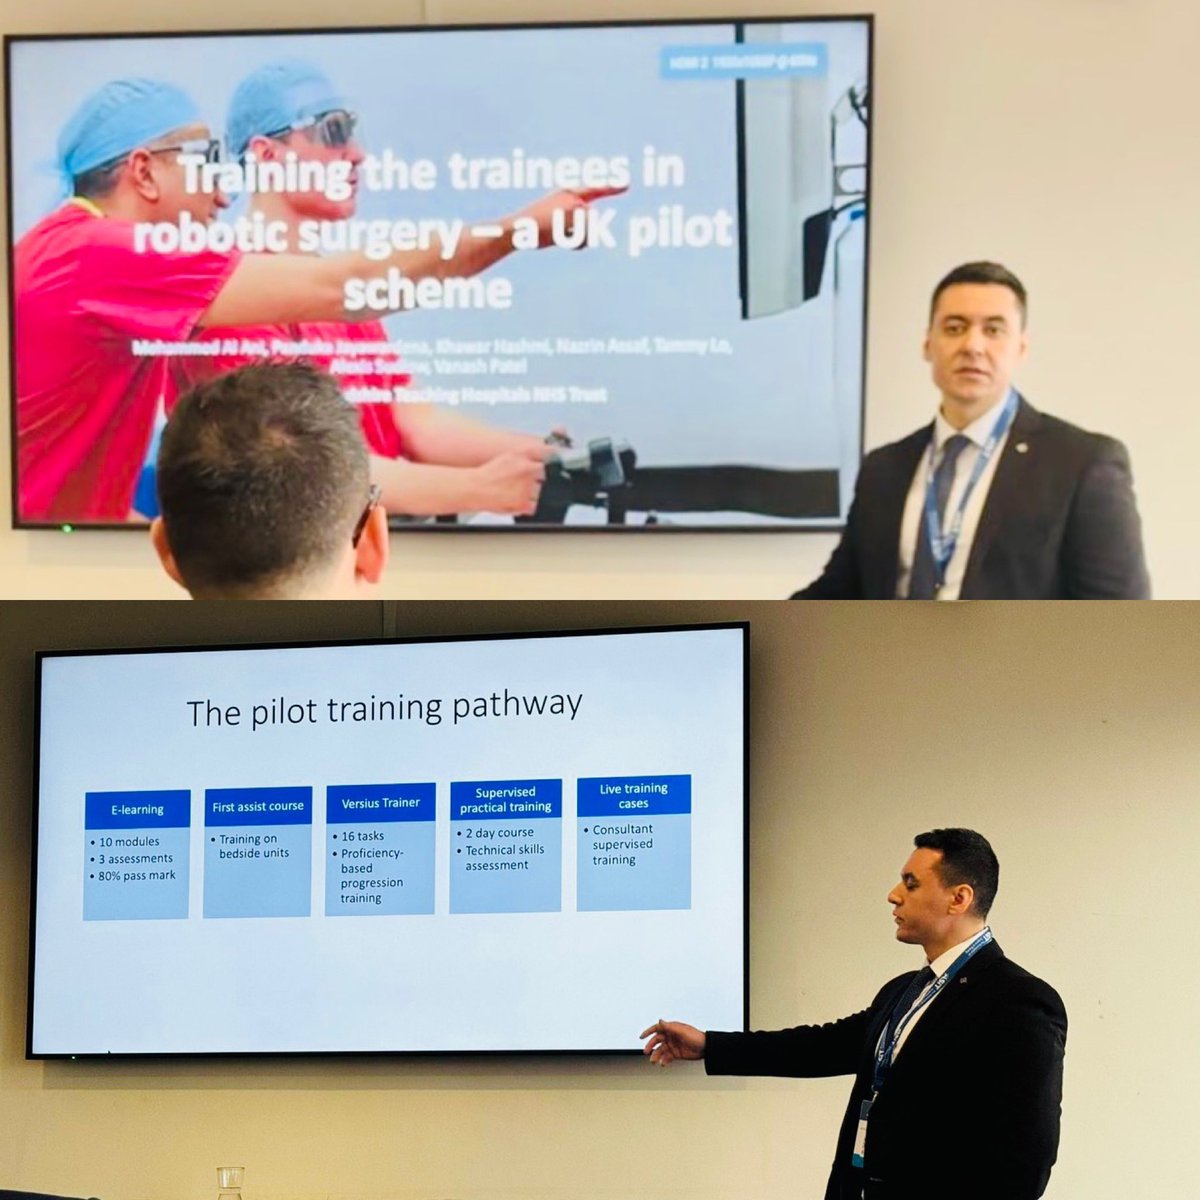 Well done @MMSAlani for presenting our @WestHertsNHS #roboticsurgery training pathway for ST4-ST8 trainees at #ASiT2024 conference.🦾 Trainees can be console surgeons through collaboration between trainer and trainee, and with the right #leadership and #teamwork. The take home…